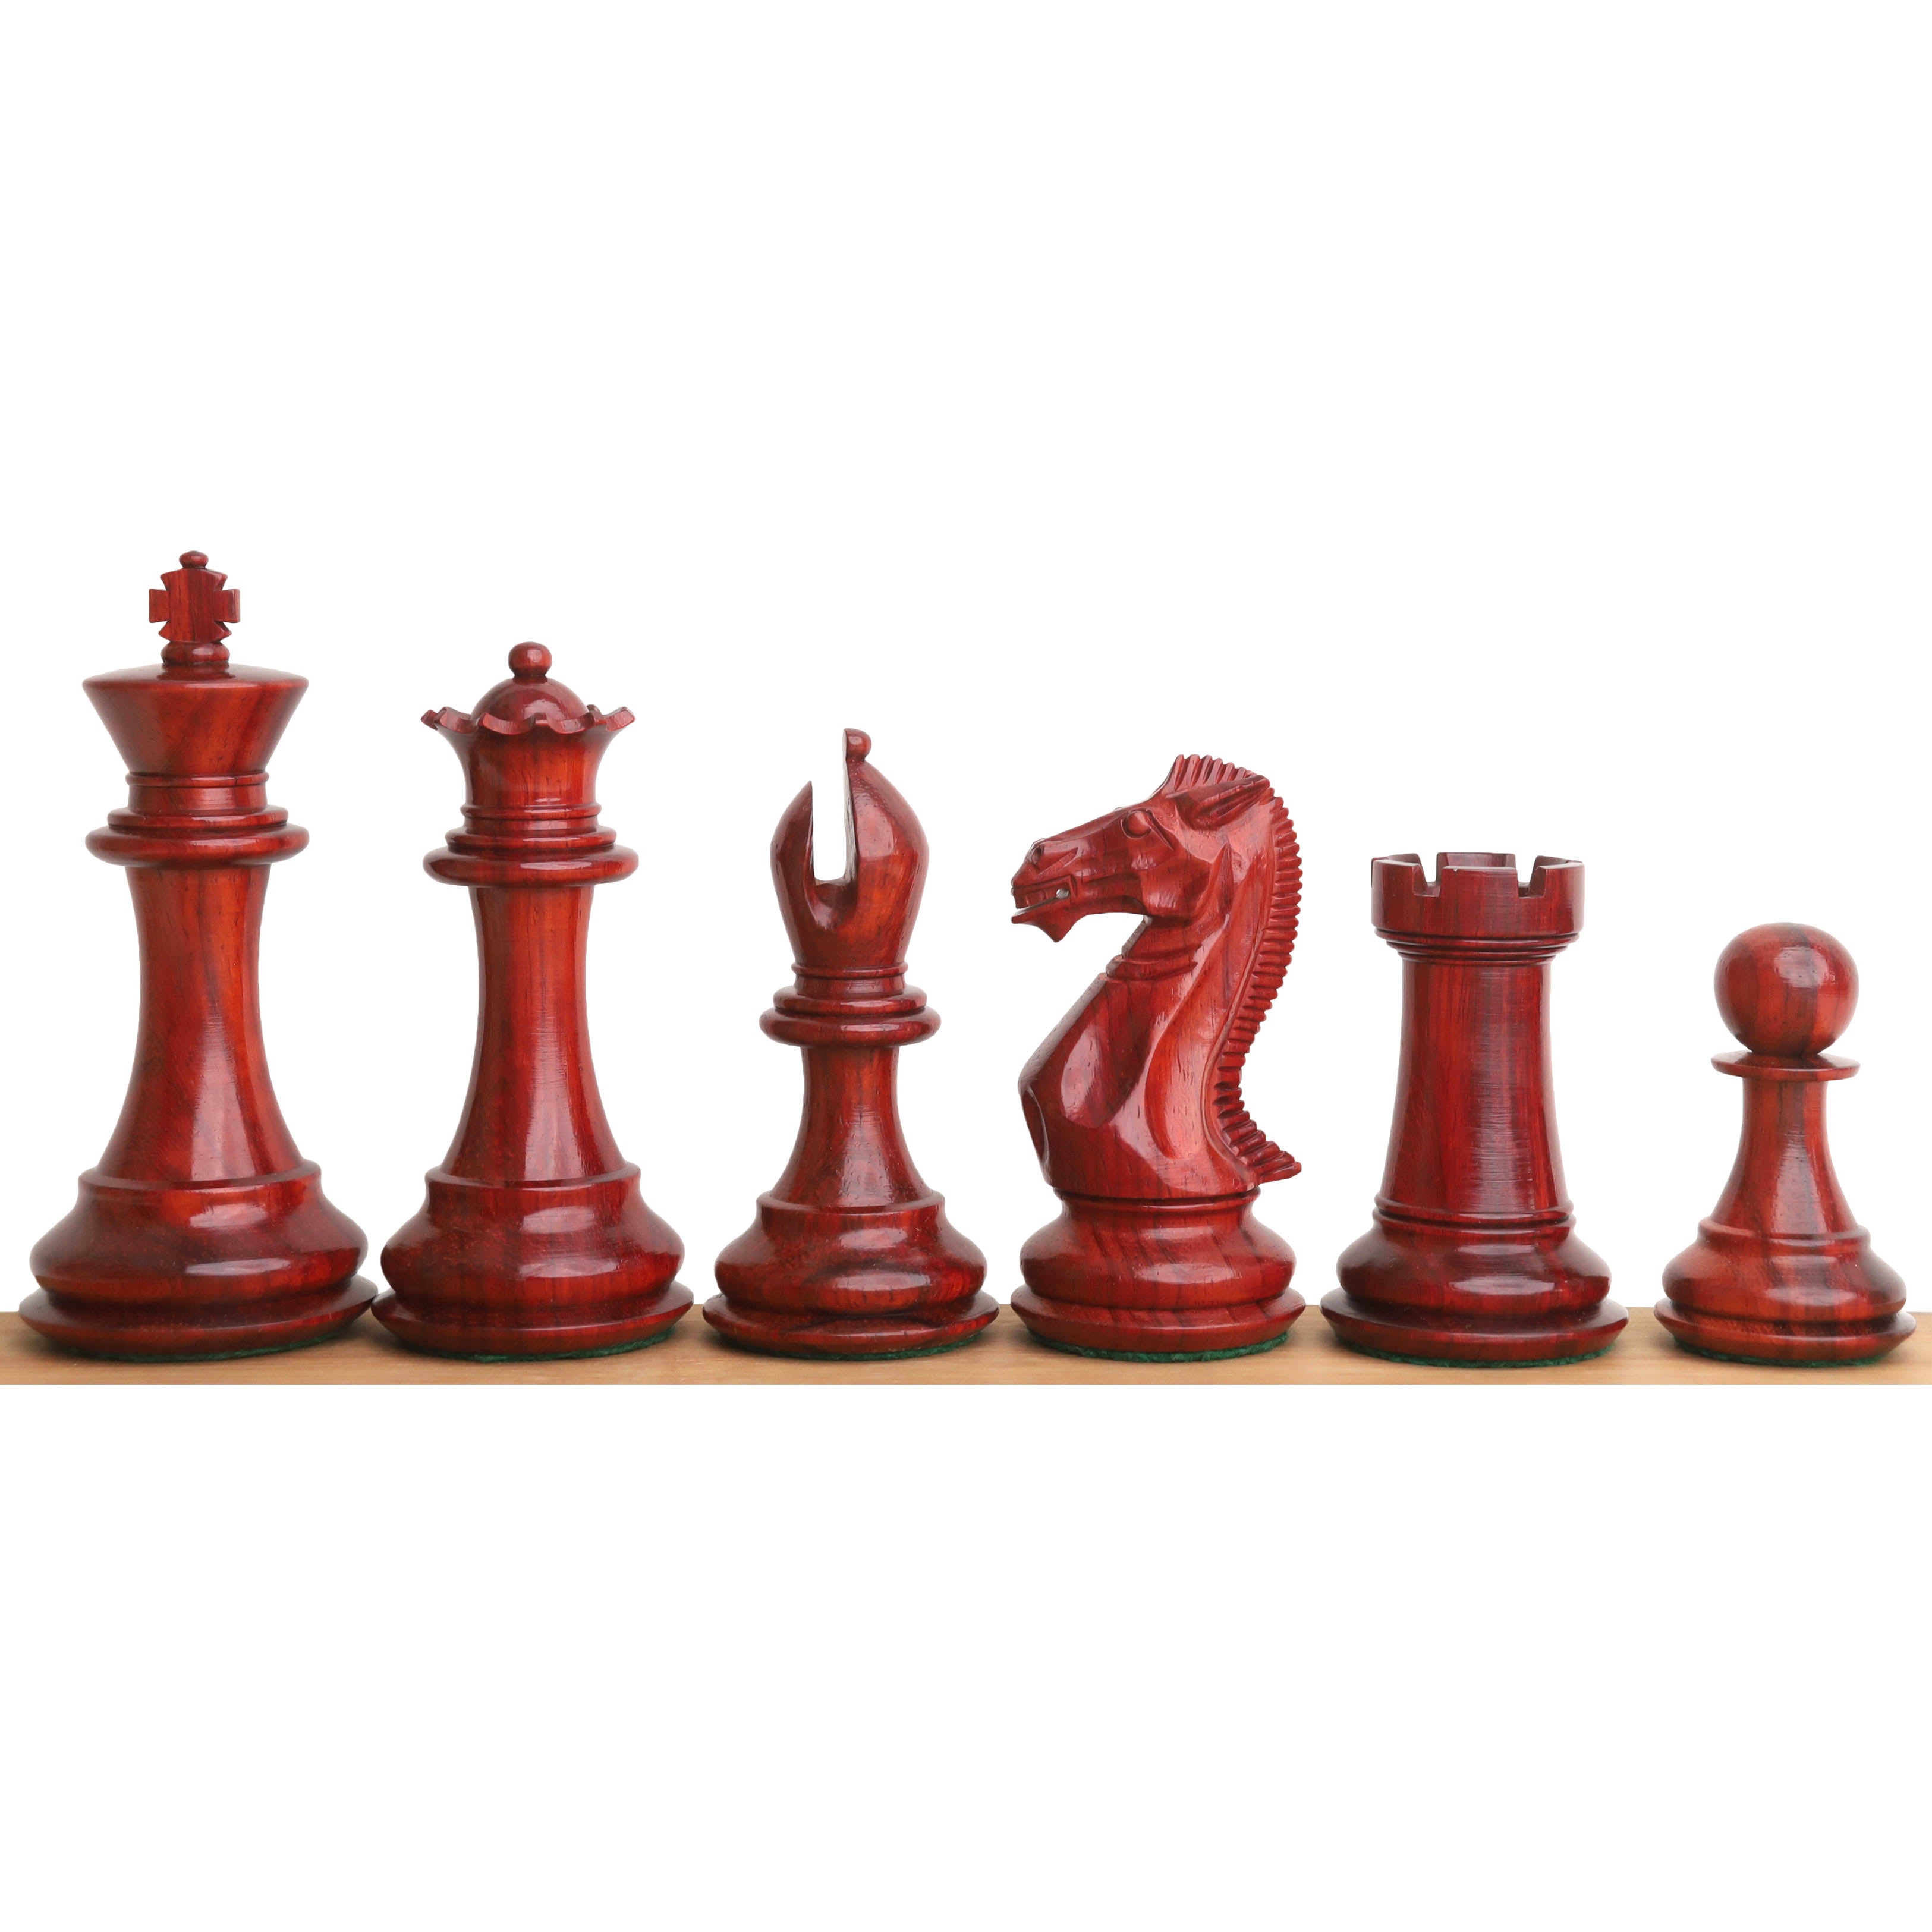 4.1″ Traveller Staunton Luxury Chess Set- Chess Pieces Only – Bud Rose Wood & Boxwood